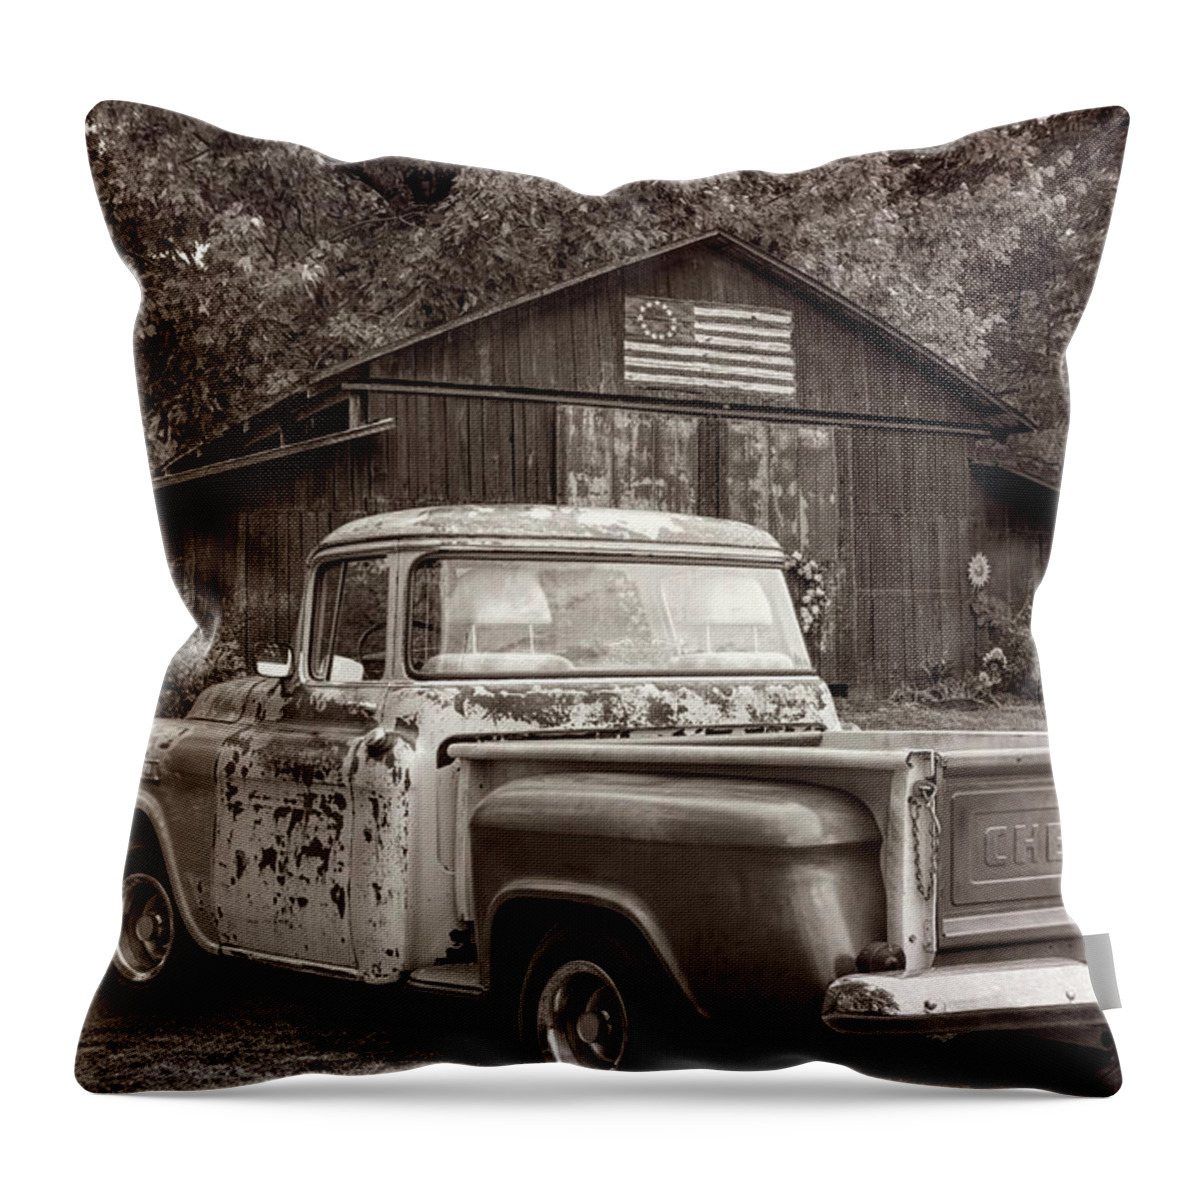 Appalachia Throw Pillow featuring the photograph Southern Sepia Vintage by Debra and Dave Vanderlaan